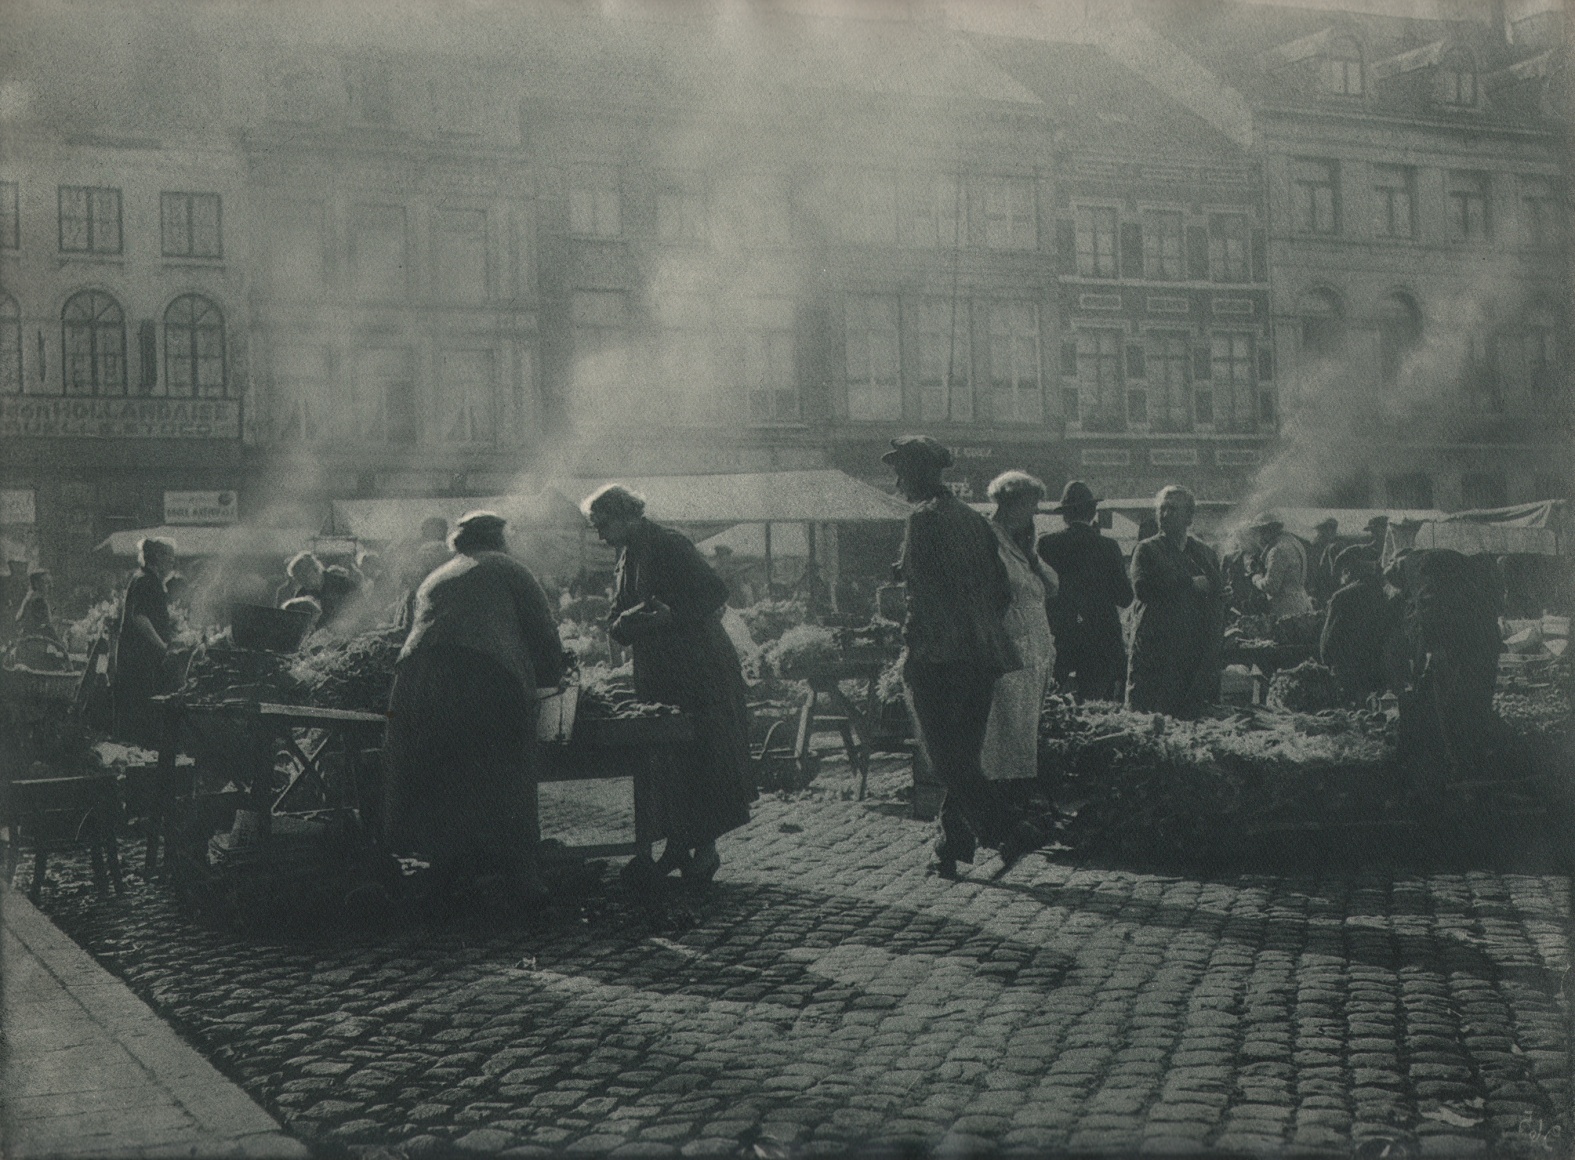 06. L&eacute;onard Misonne, Untitled, c. 1937. Many figures on a cobbled market street with steam rising from various booths. Gray/green-toned print.